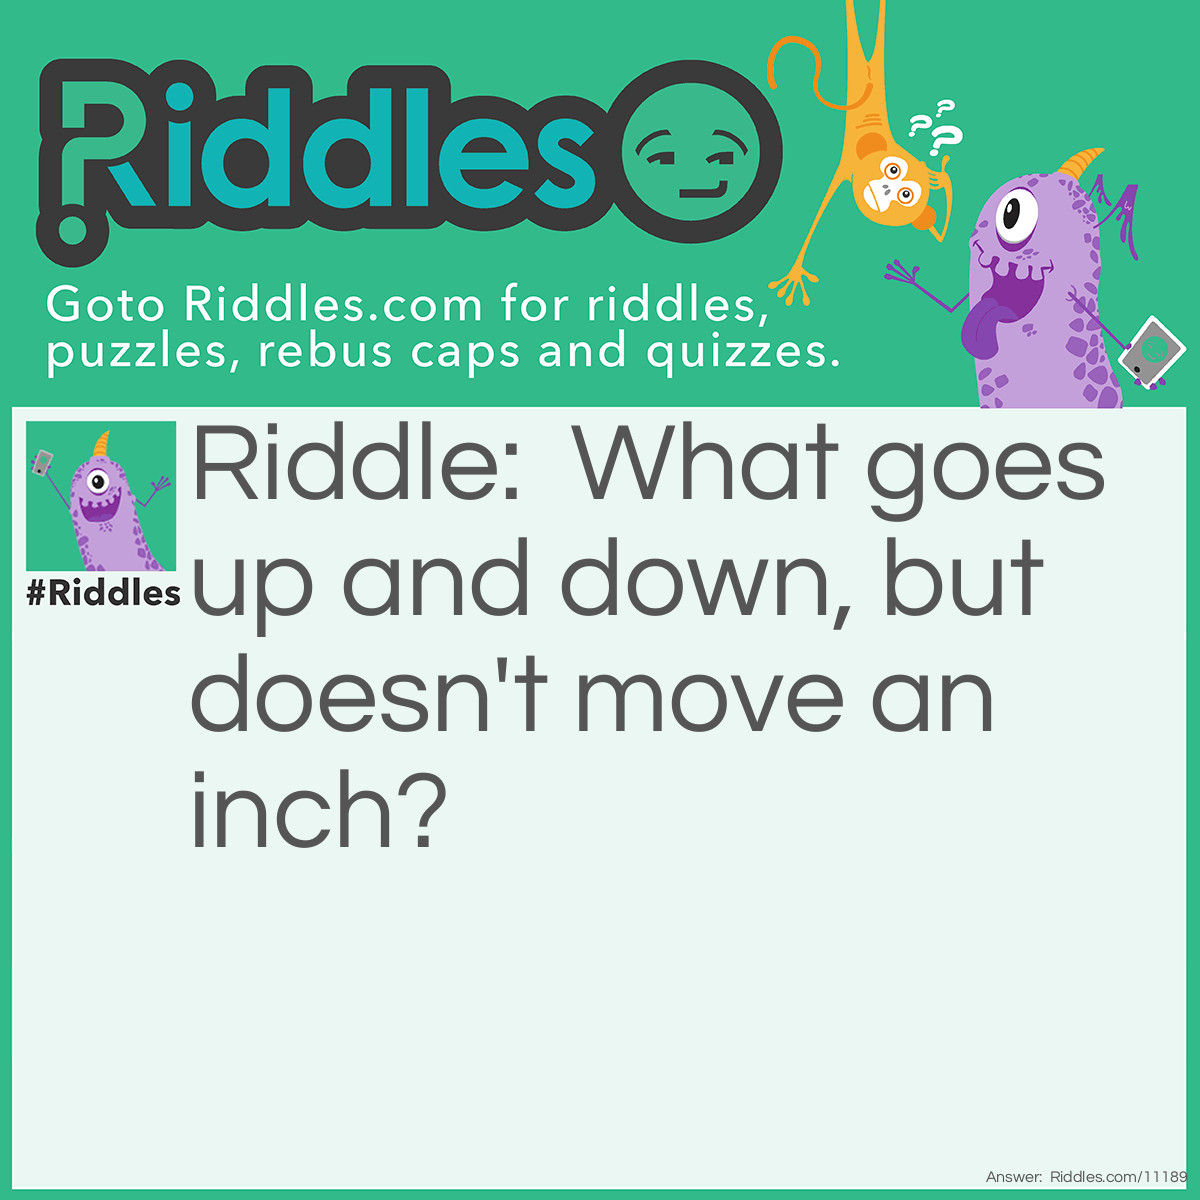 Riddle: What goes up and down, but doesn't move an inch? Answer: Stairs.